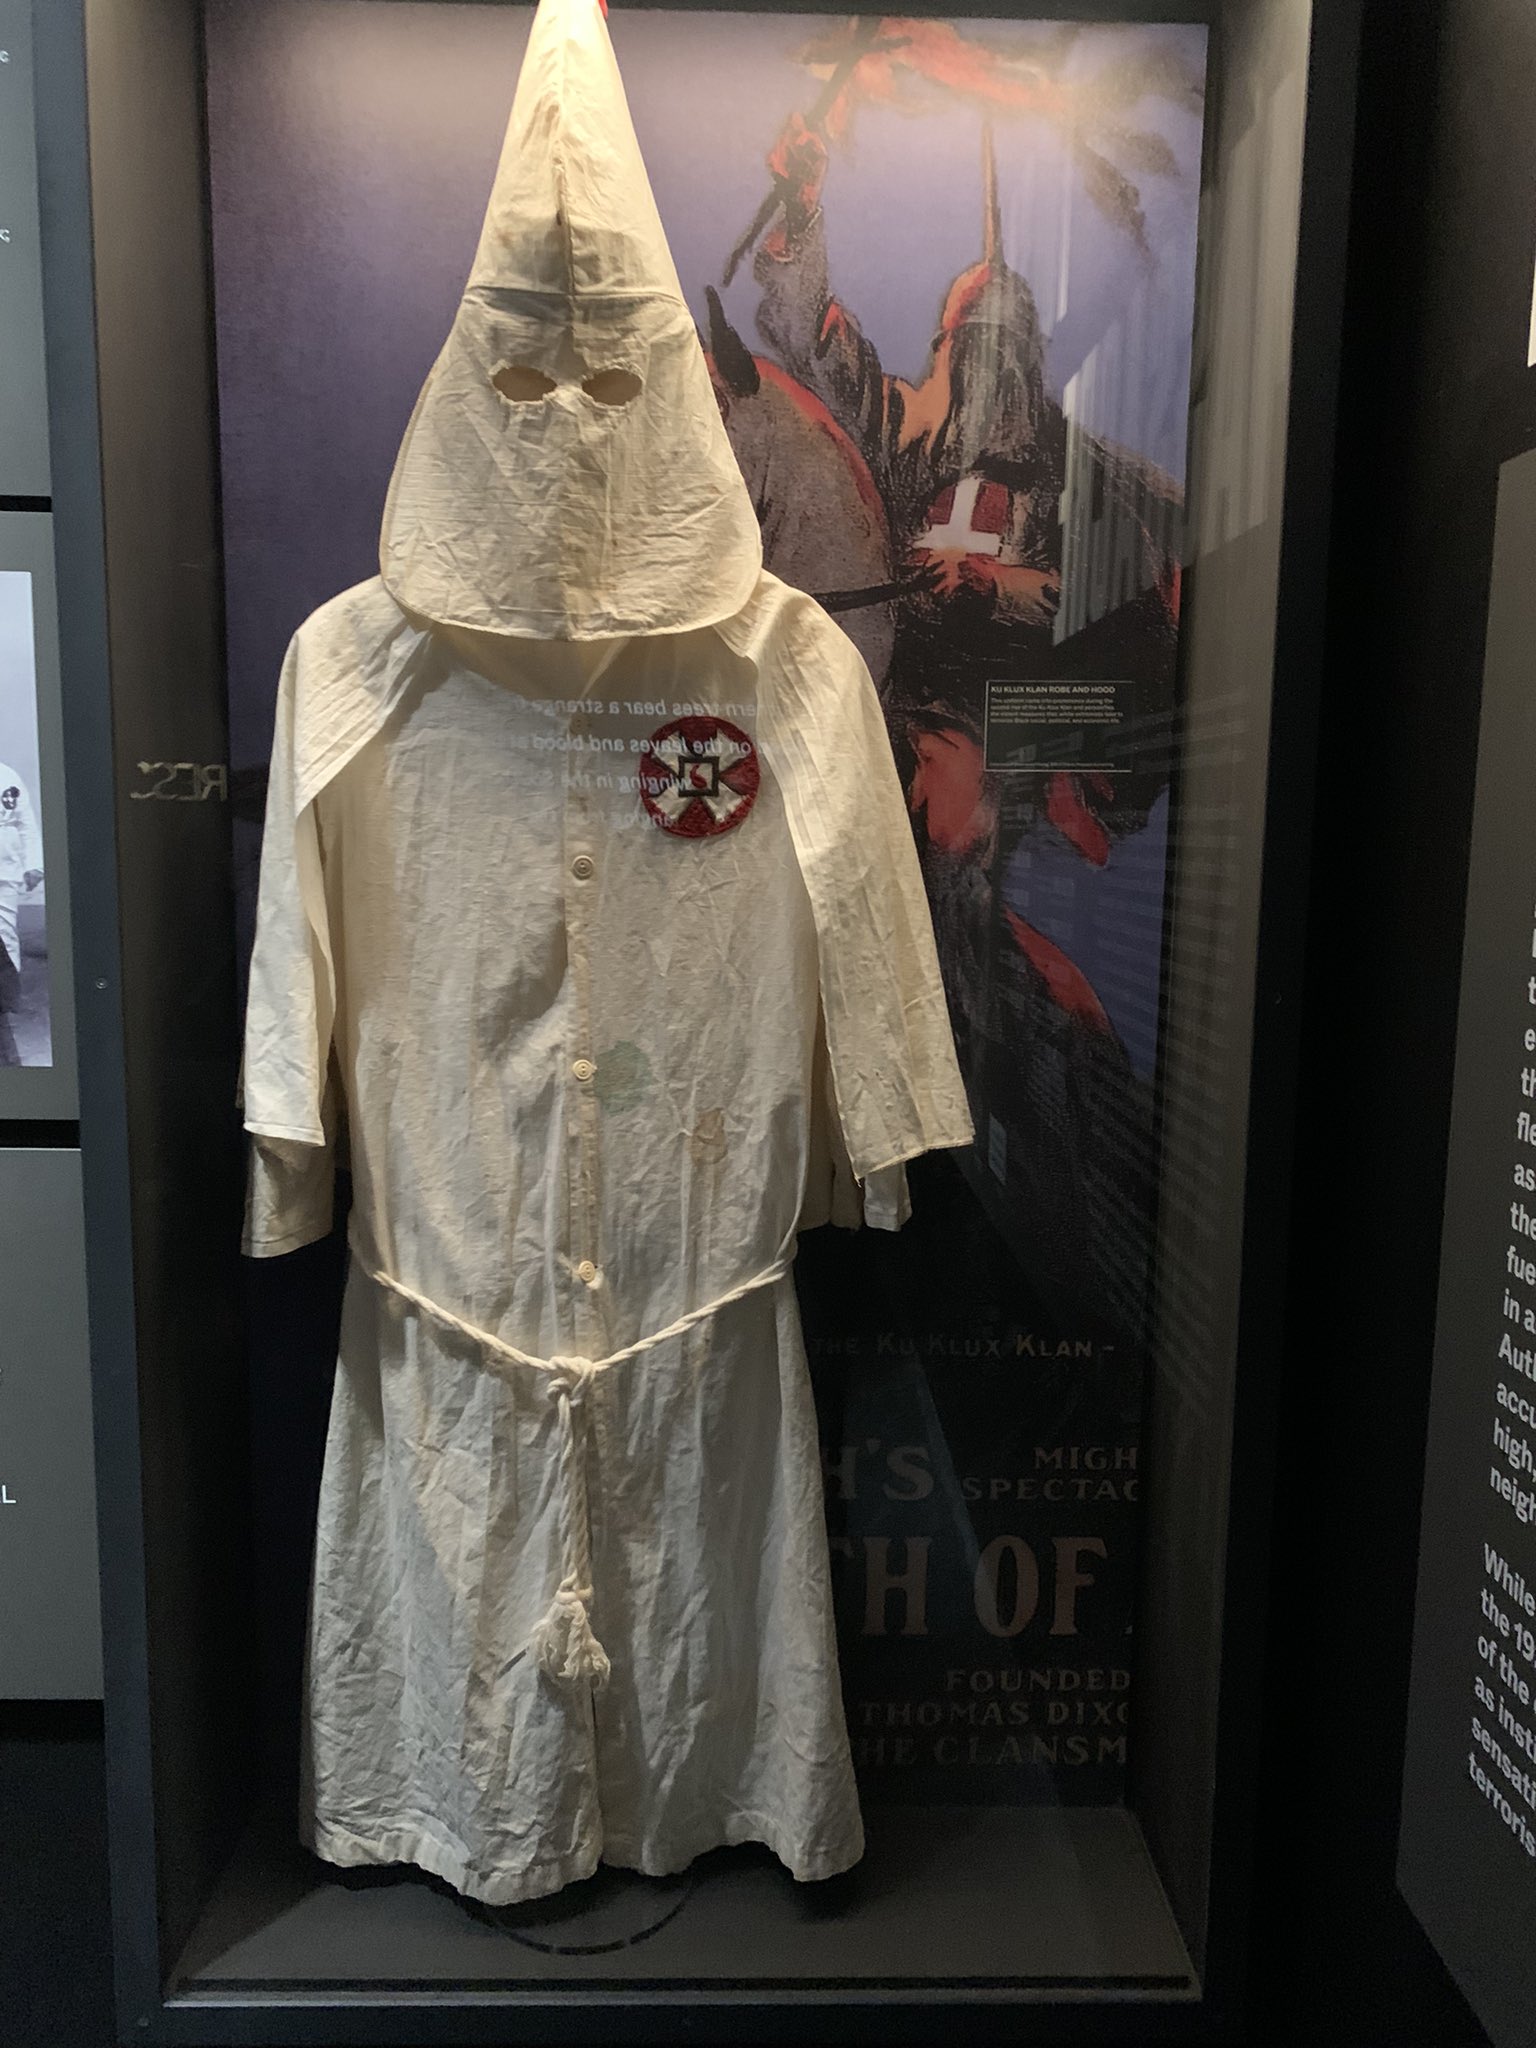 Karen Attiah on X: A blood-stained Ku Klux Klan outfit on display